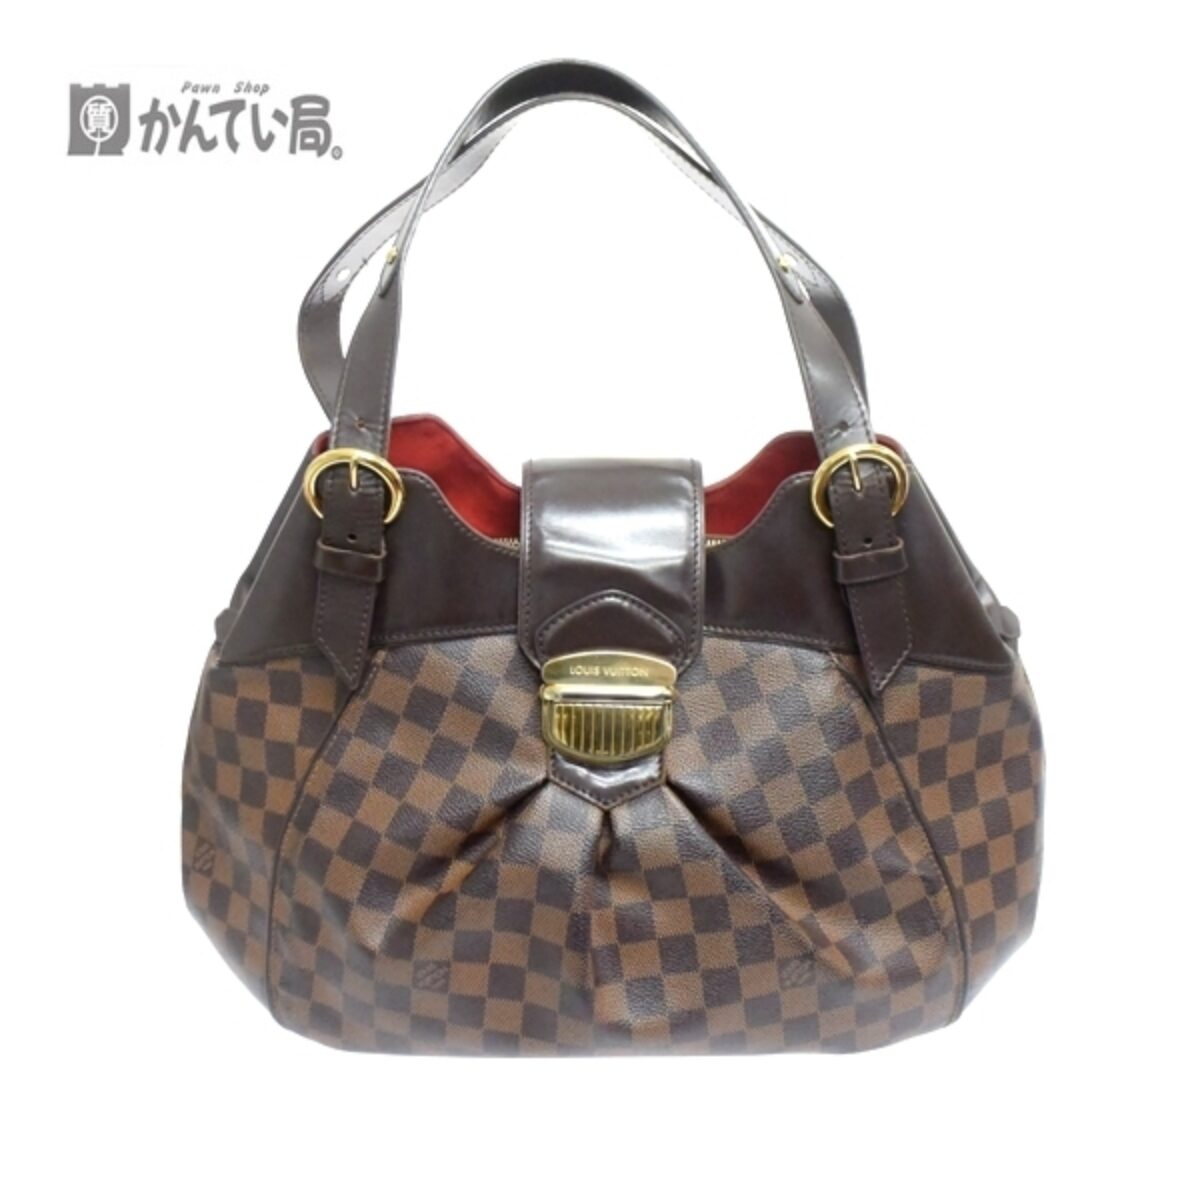 LOUIS VUITTON ルイヴィトン システィナダミエ トートバッグ